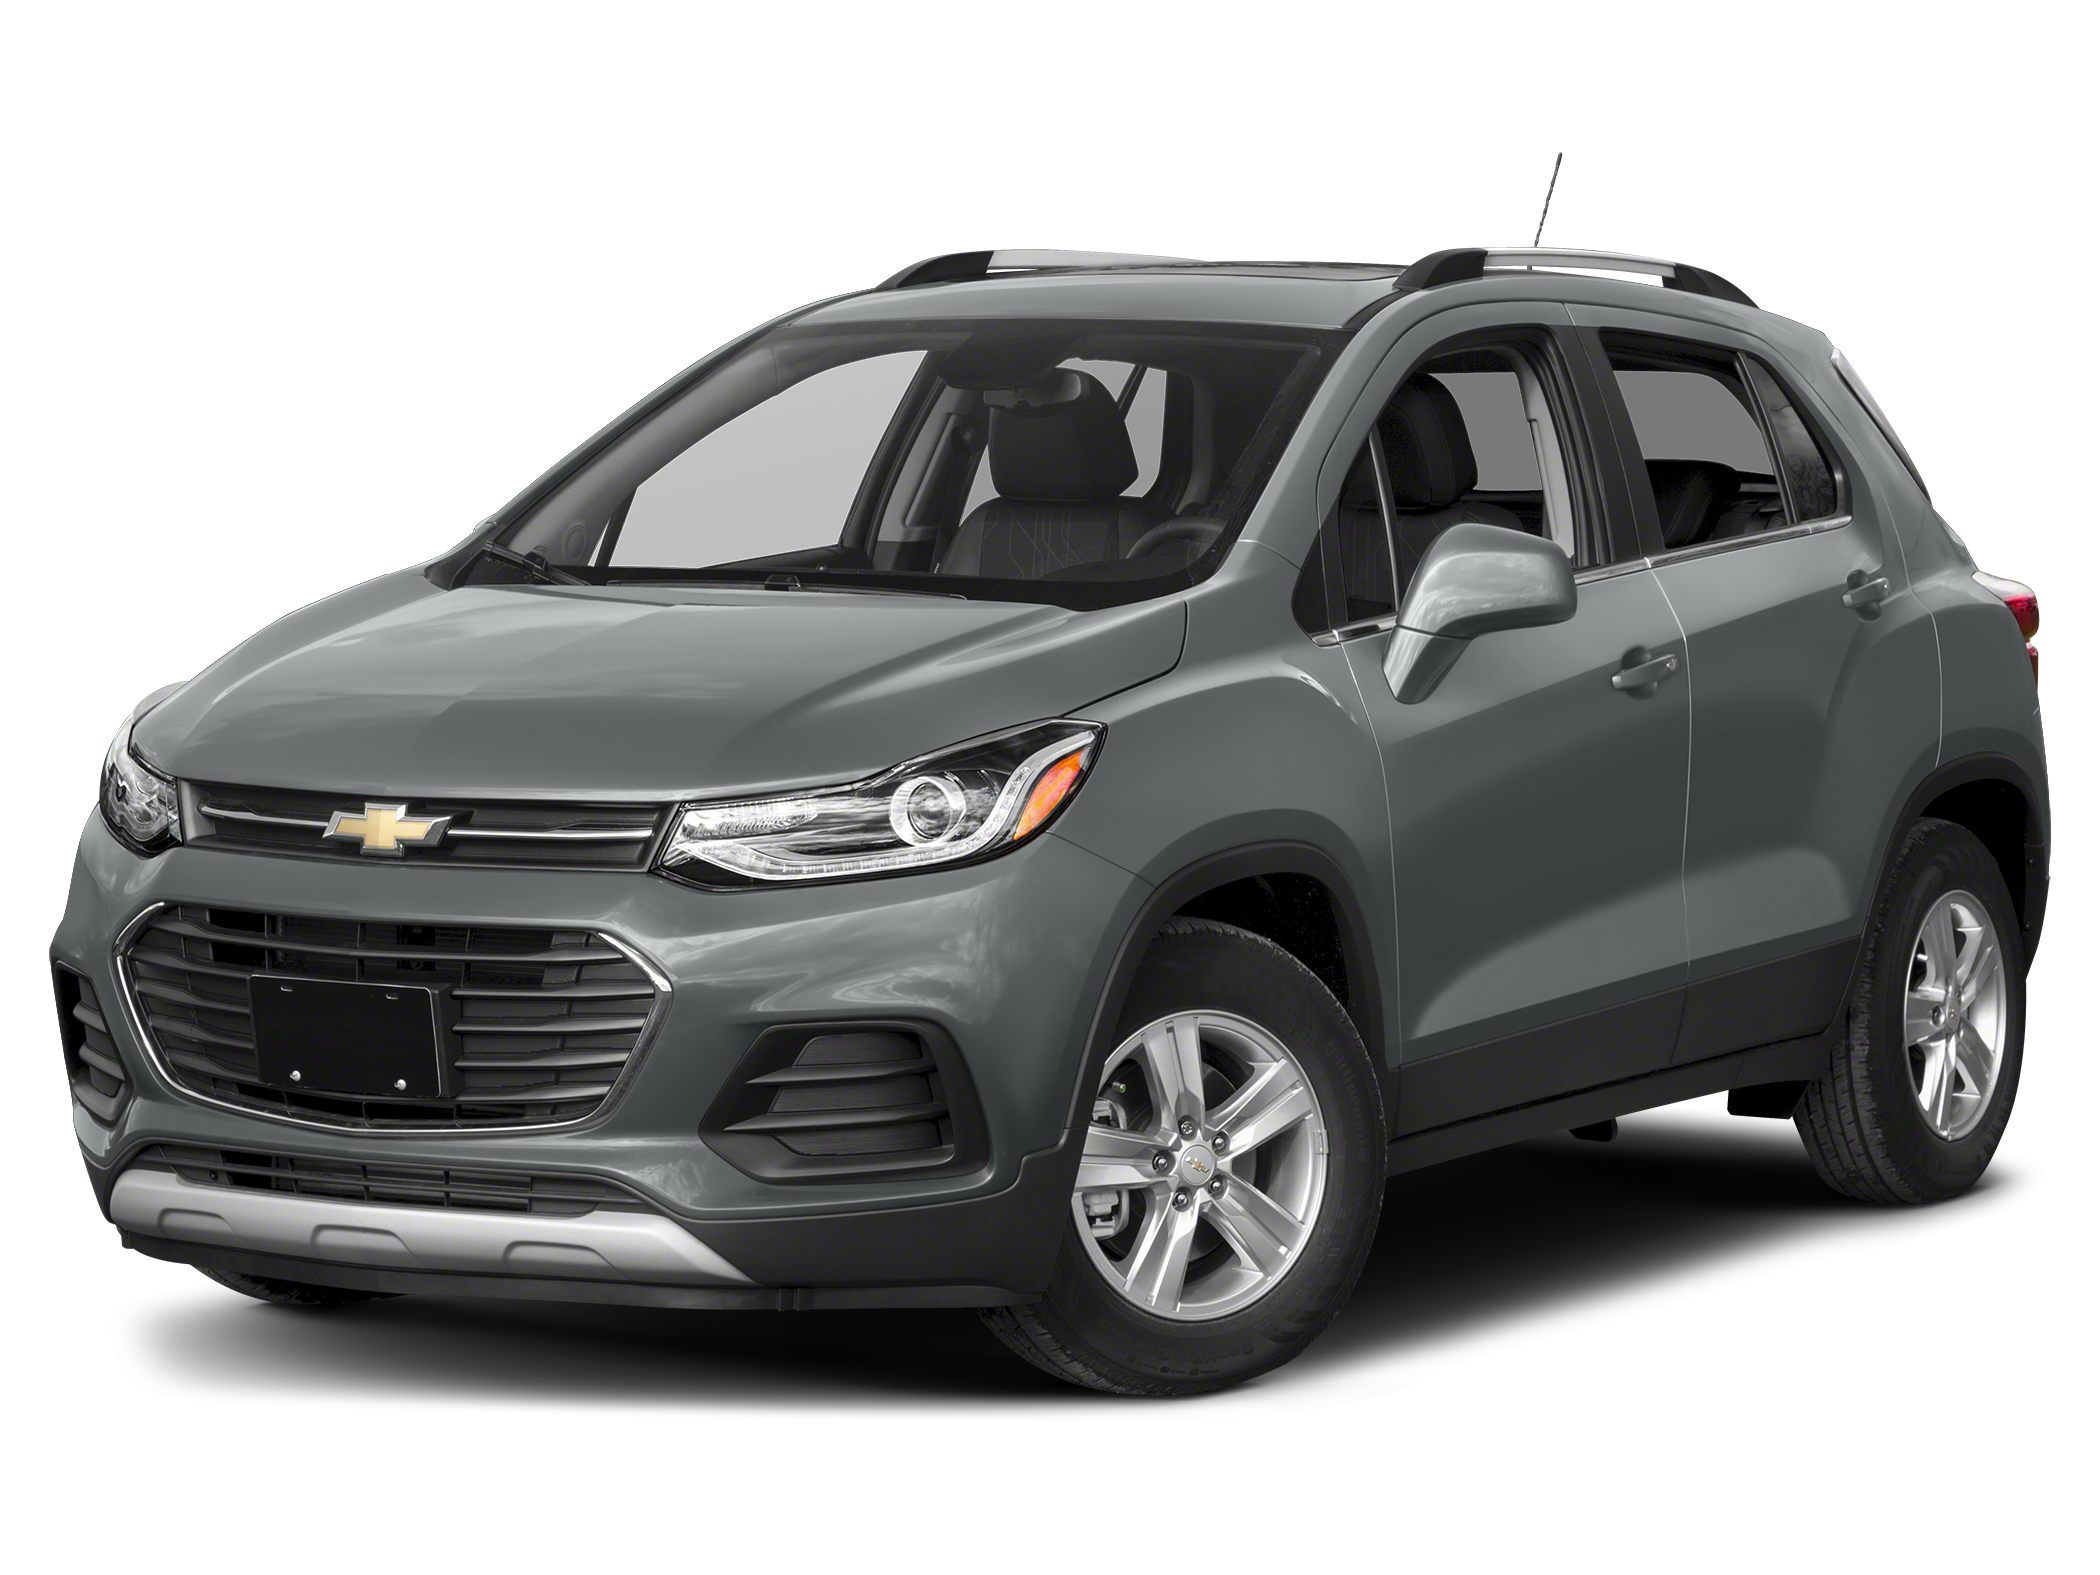 Used Chevrolet Trax North Canton Oh